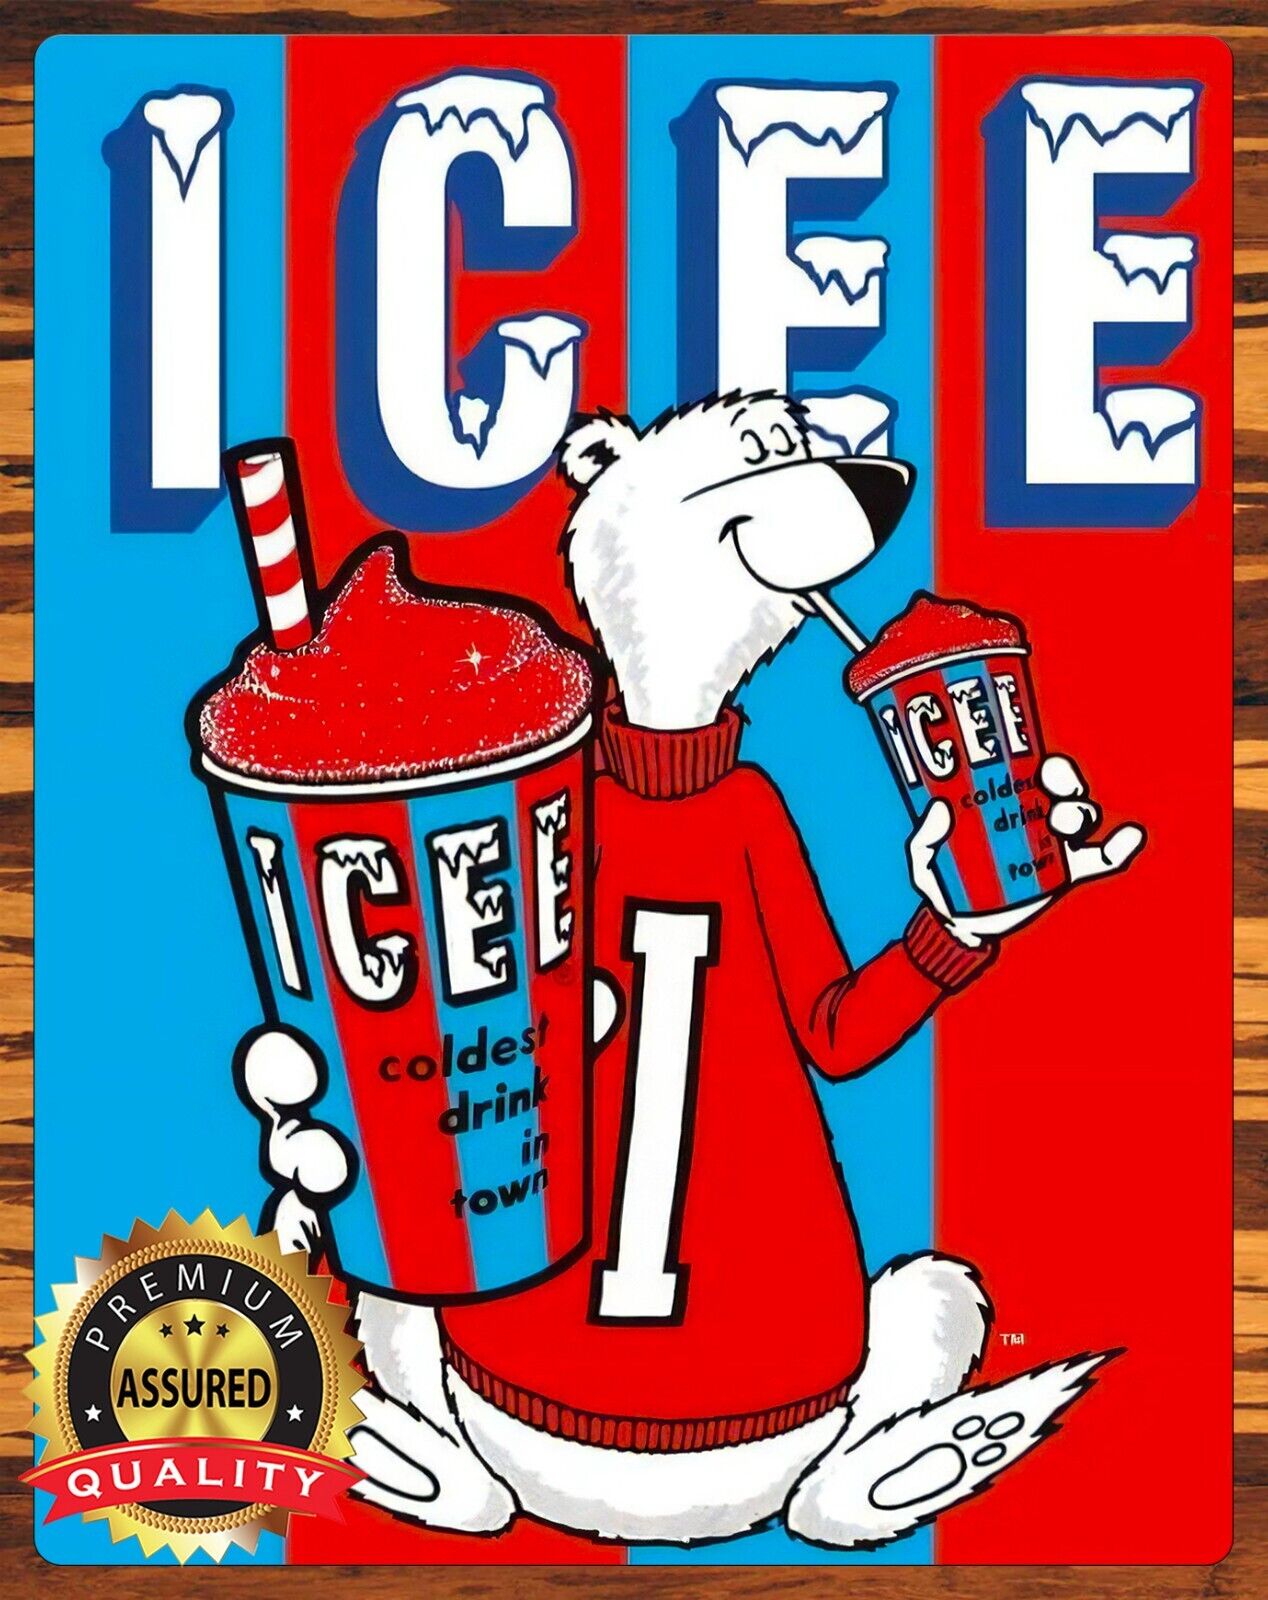 ICEE - Coldest Drink In Town - Polar Bear - Metal Sign 11 x 14